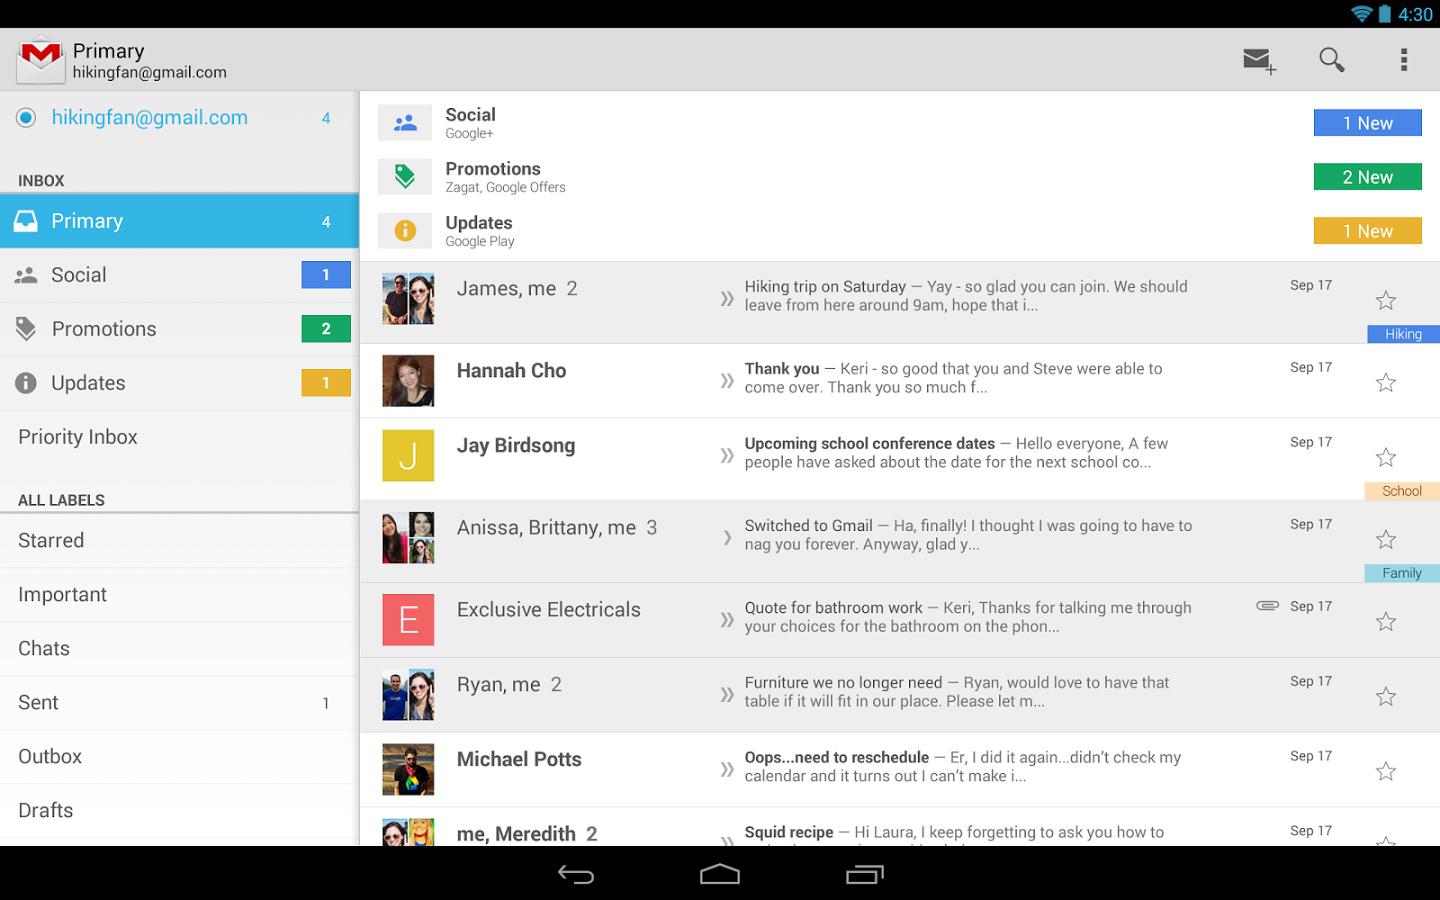 gmail android app one billion downloads